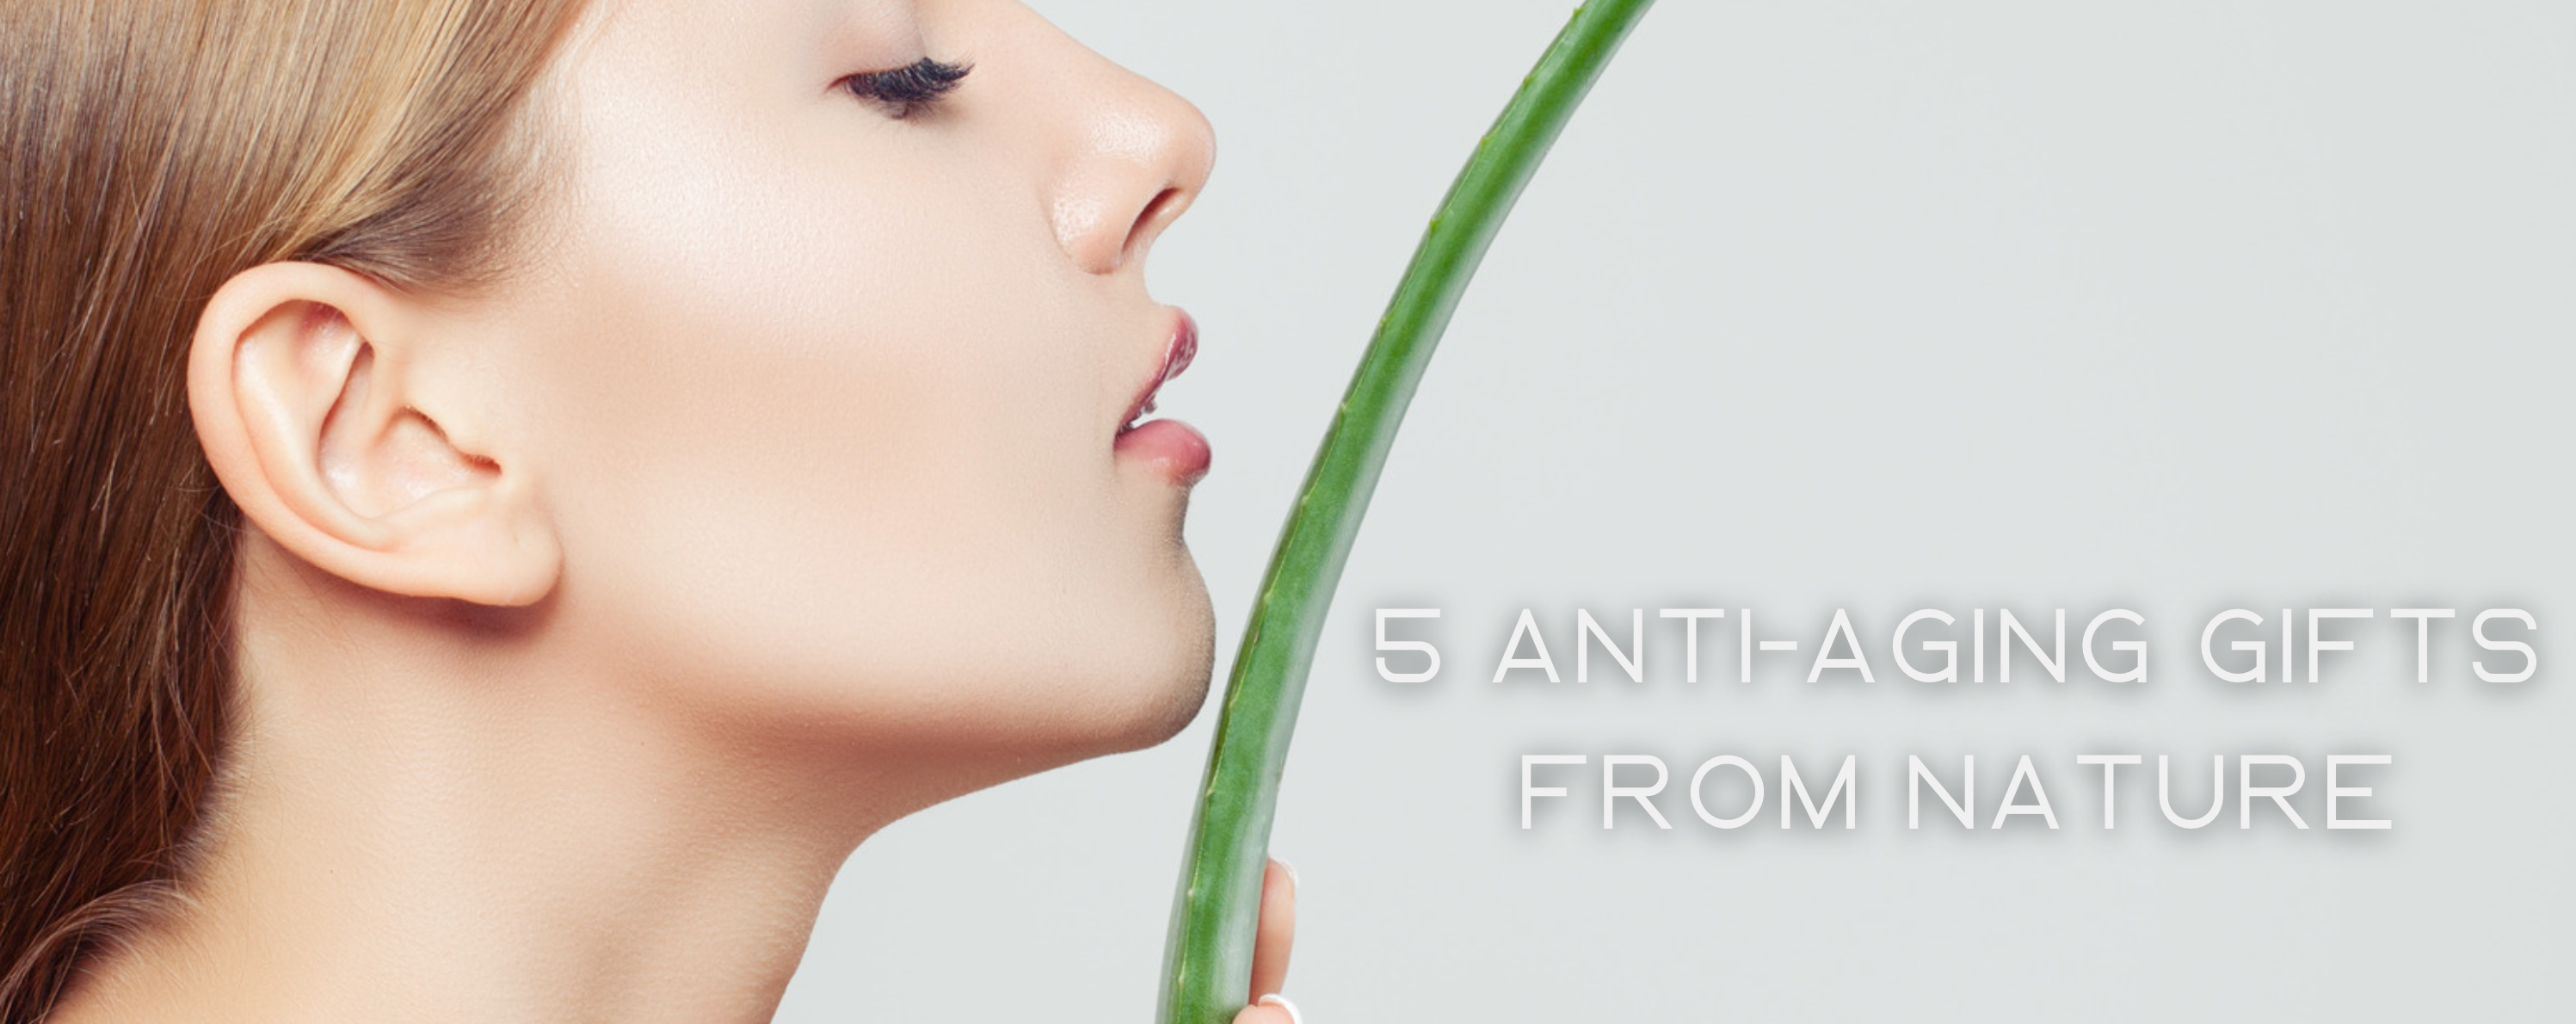 5 Anti-Aging Gifts from Nature You Will Love